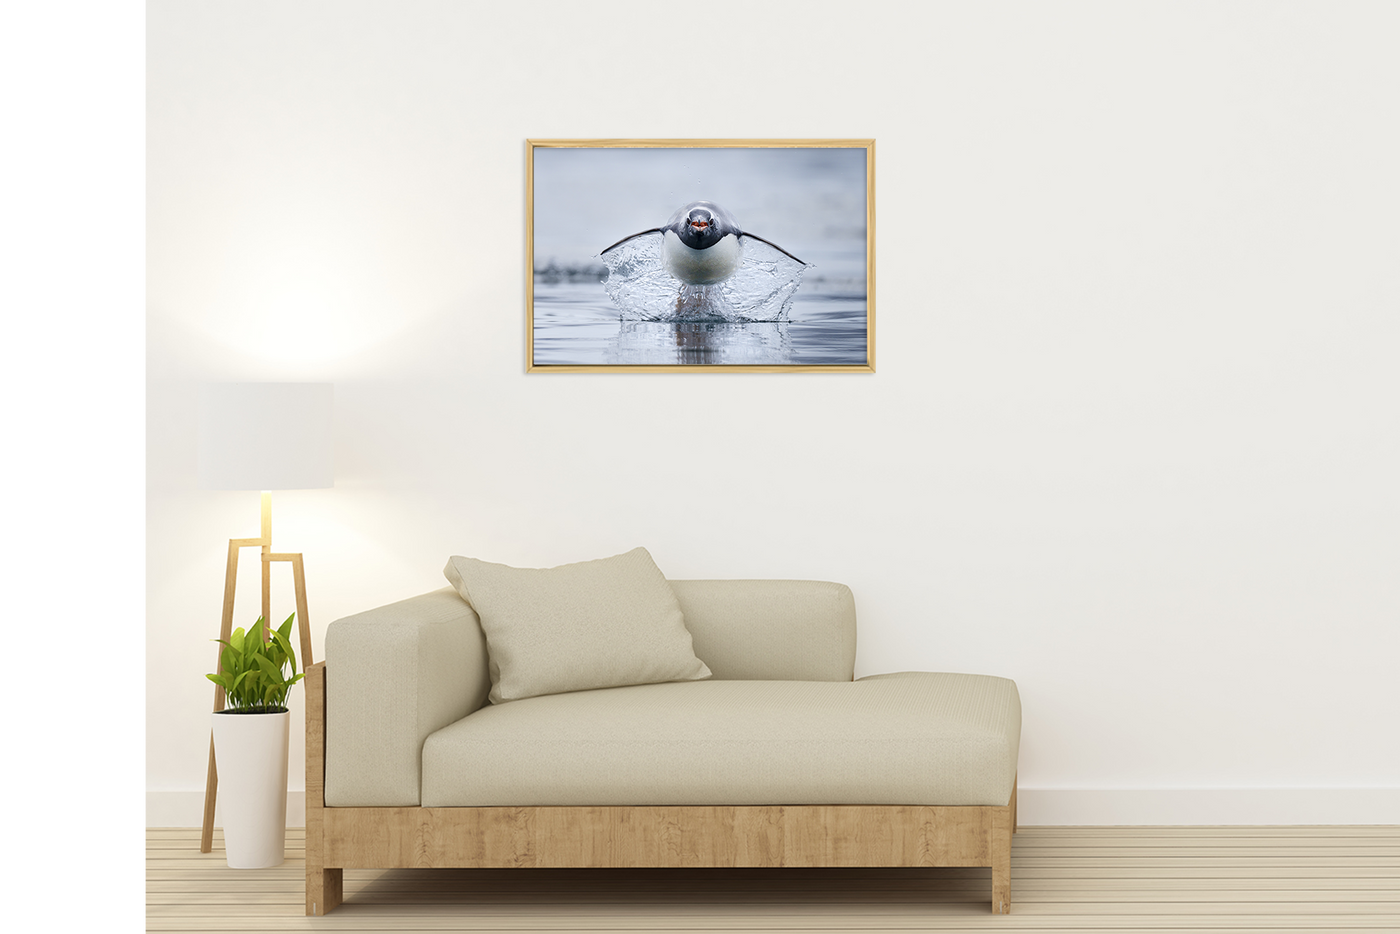 Acrylic Float Frame in white finish with Craig Parry ocean photography print